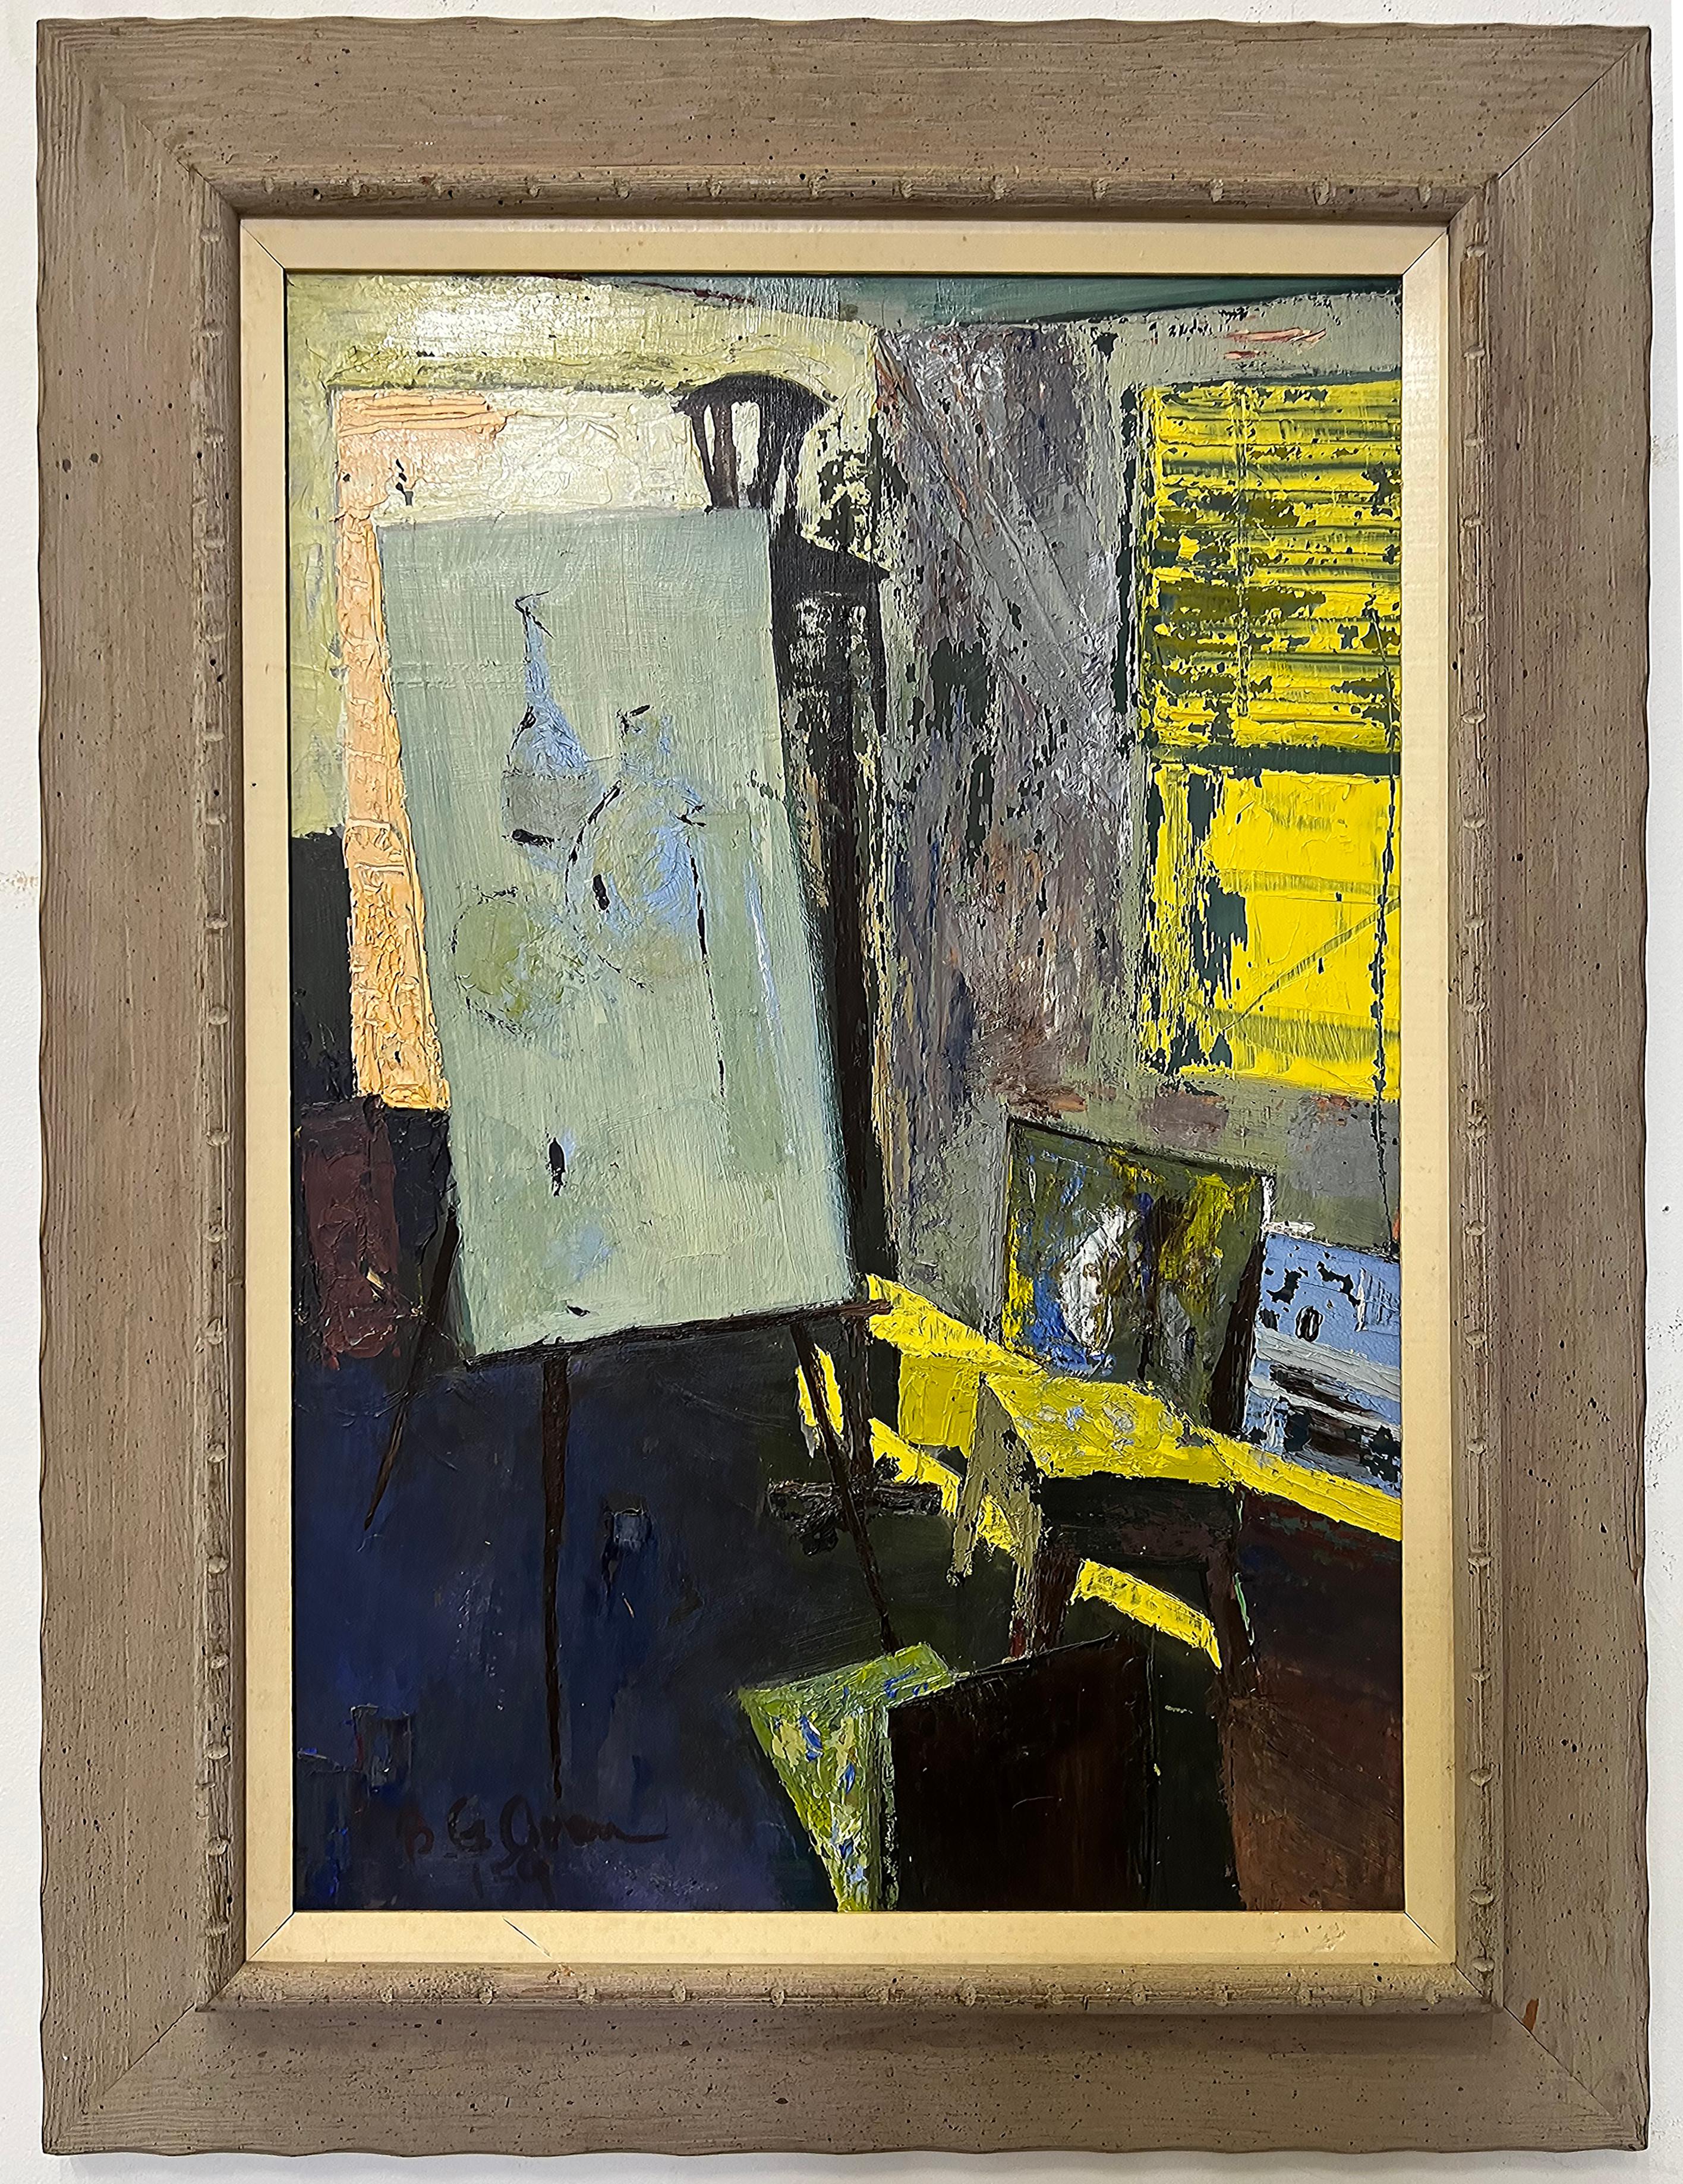 1959 B. G. Orem Mid-century Modern Abstract Oil Painting of His Studio For Sale 2